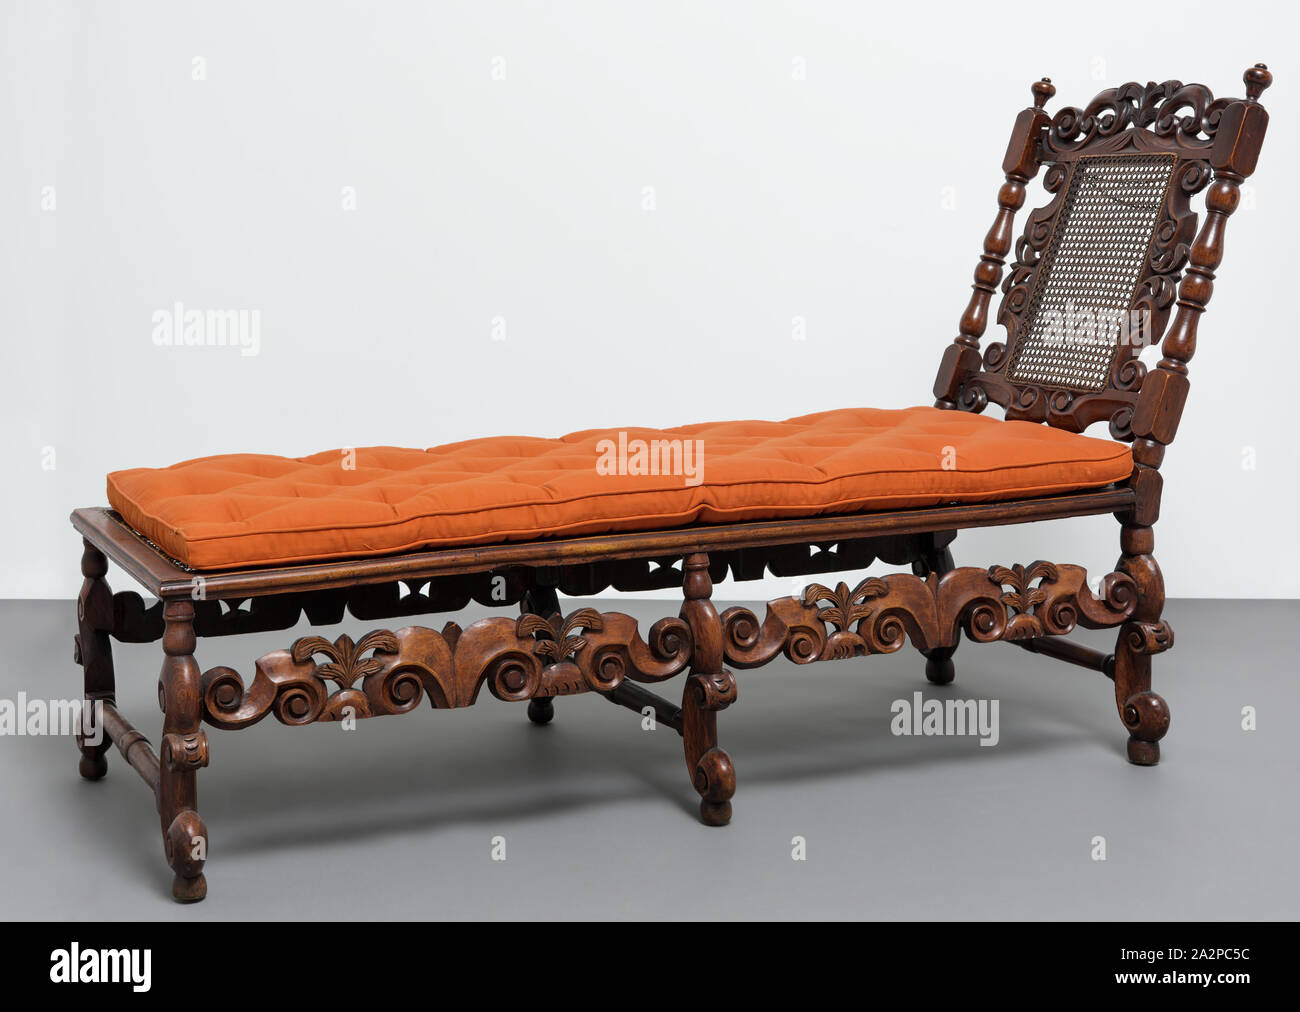 Unknown (American), Day Bed, between 1700 and 1725, walnut and cane, Overall: 40 3/4 inches × 60 inches × 23 1/2 inches (103.5 × 152.4 × 59.7 cm Stock Photo